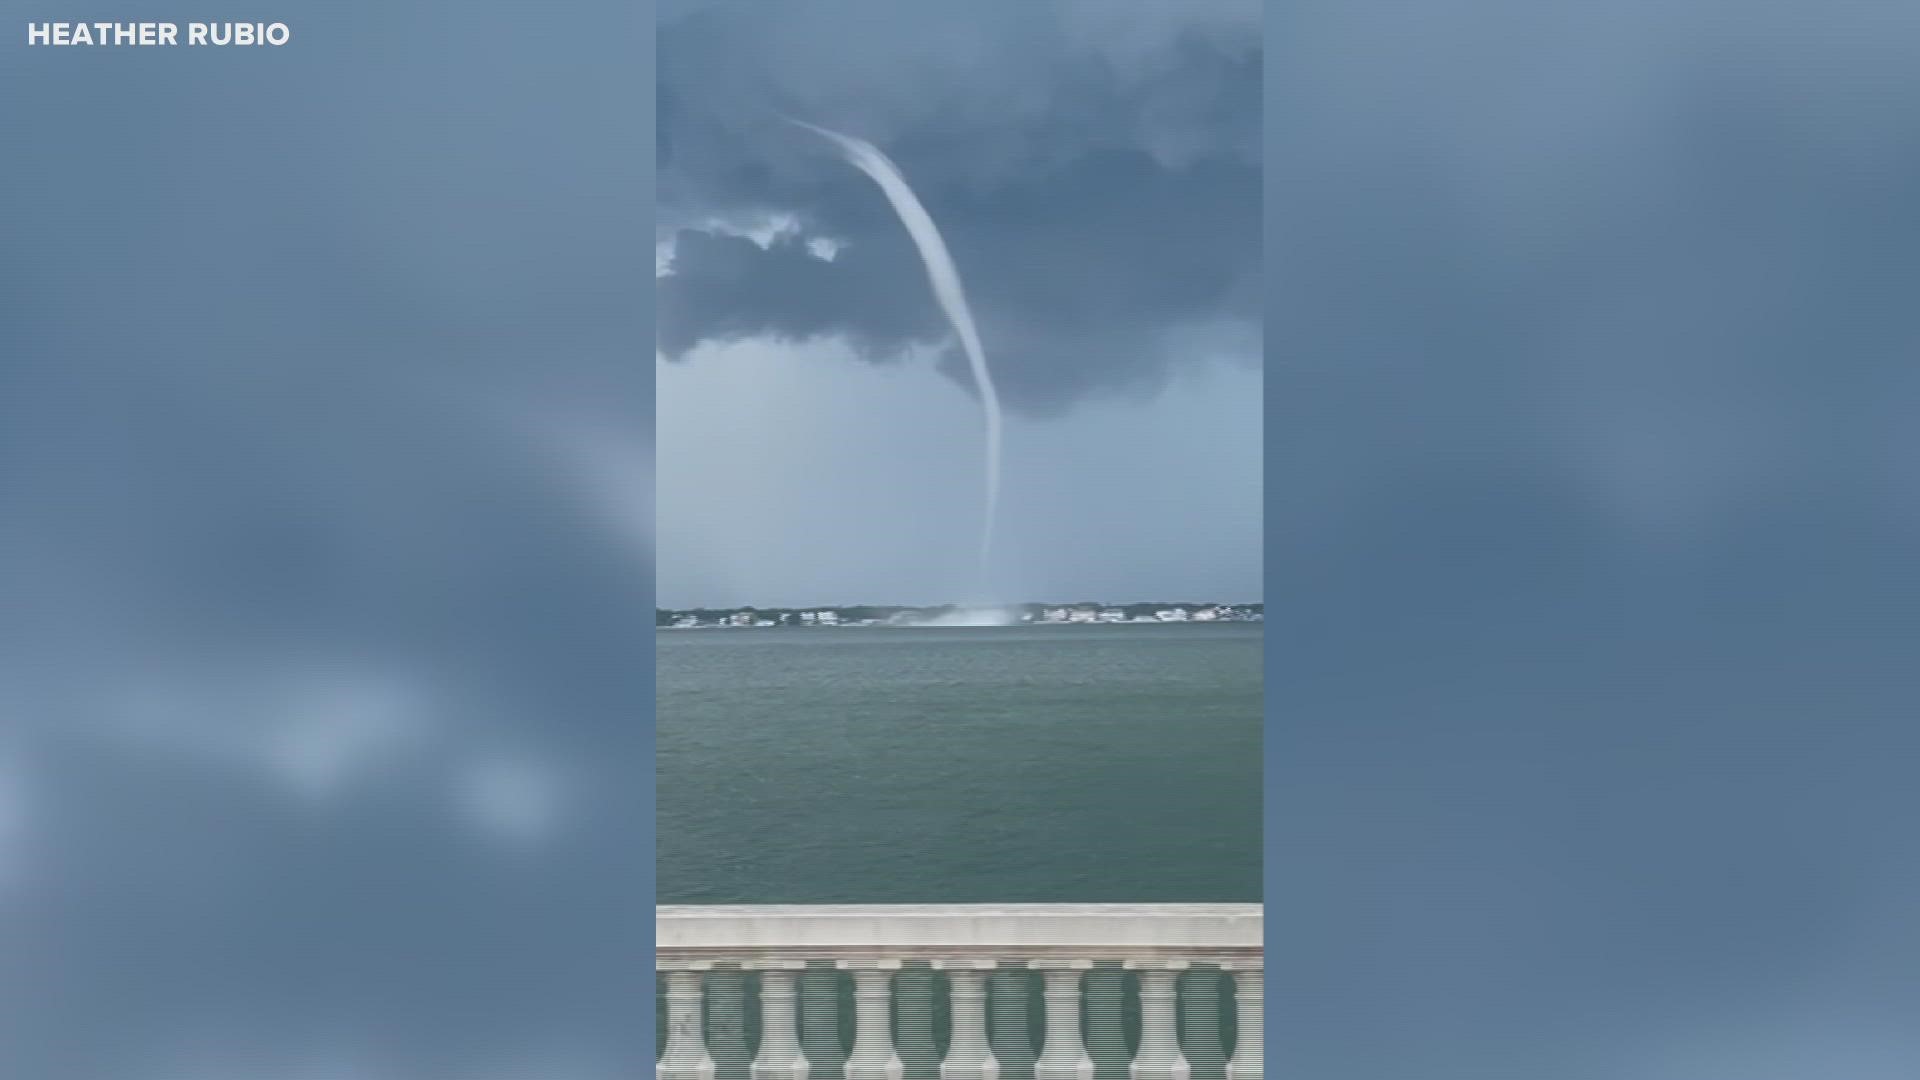 A waterspout was seen twirling on the water off of Bayshore Boulevard.